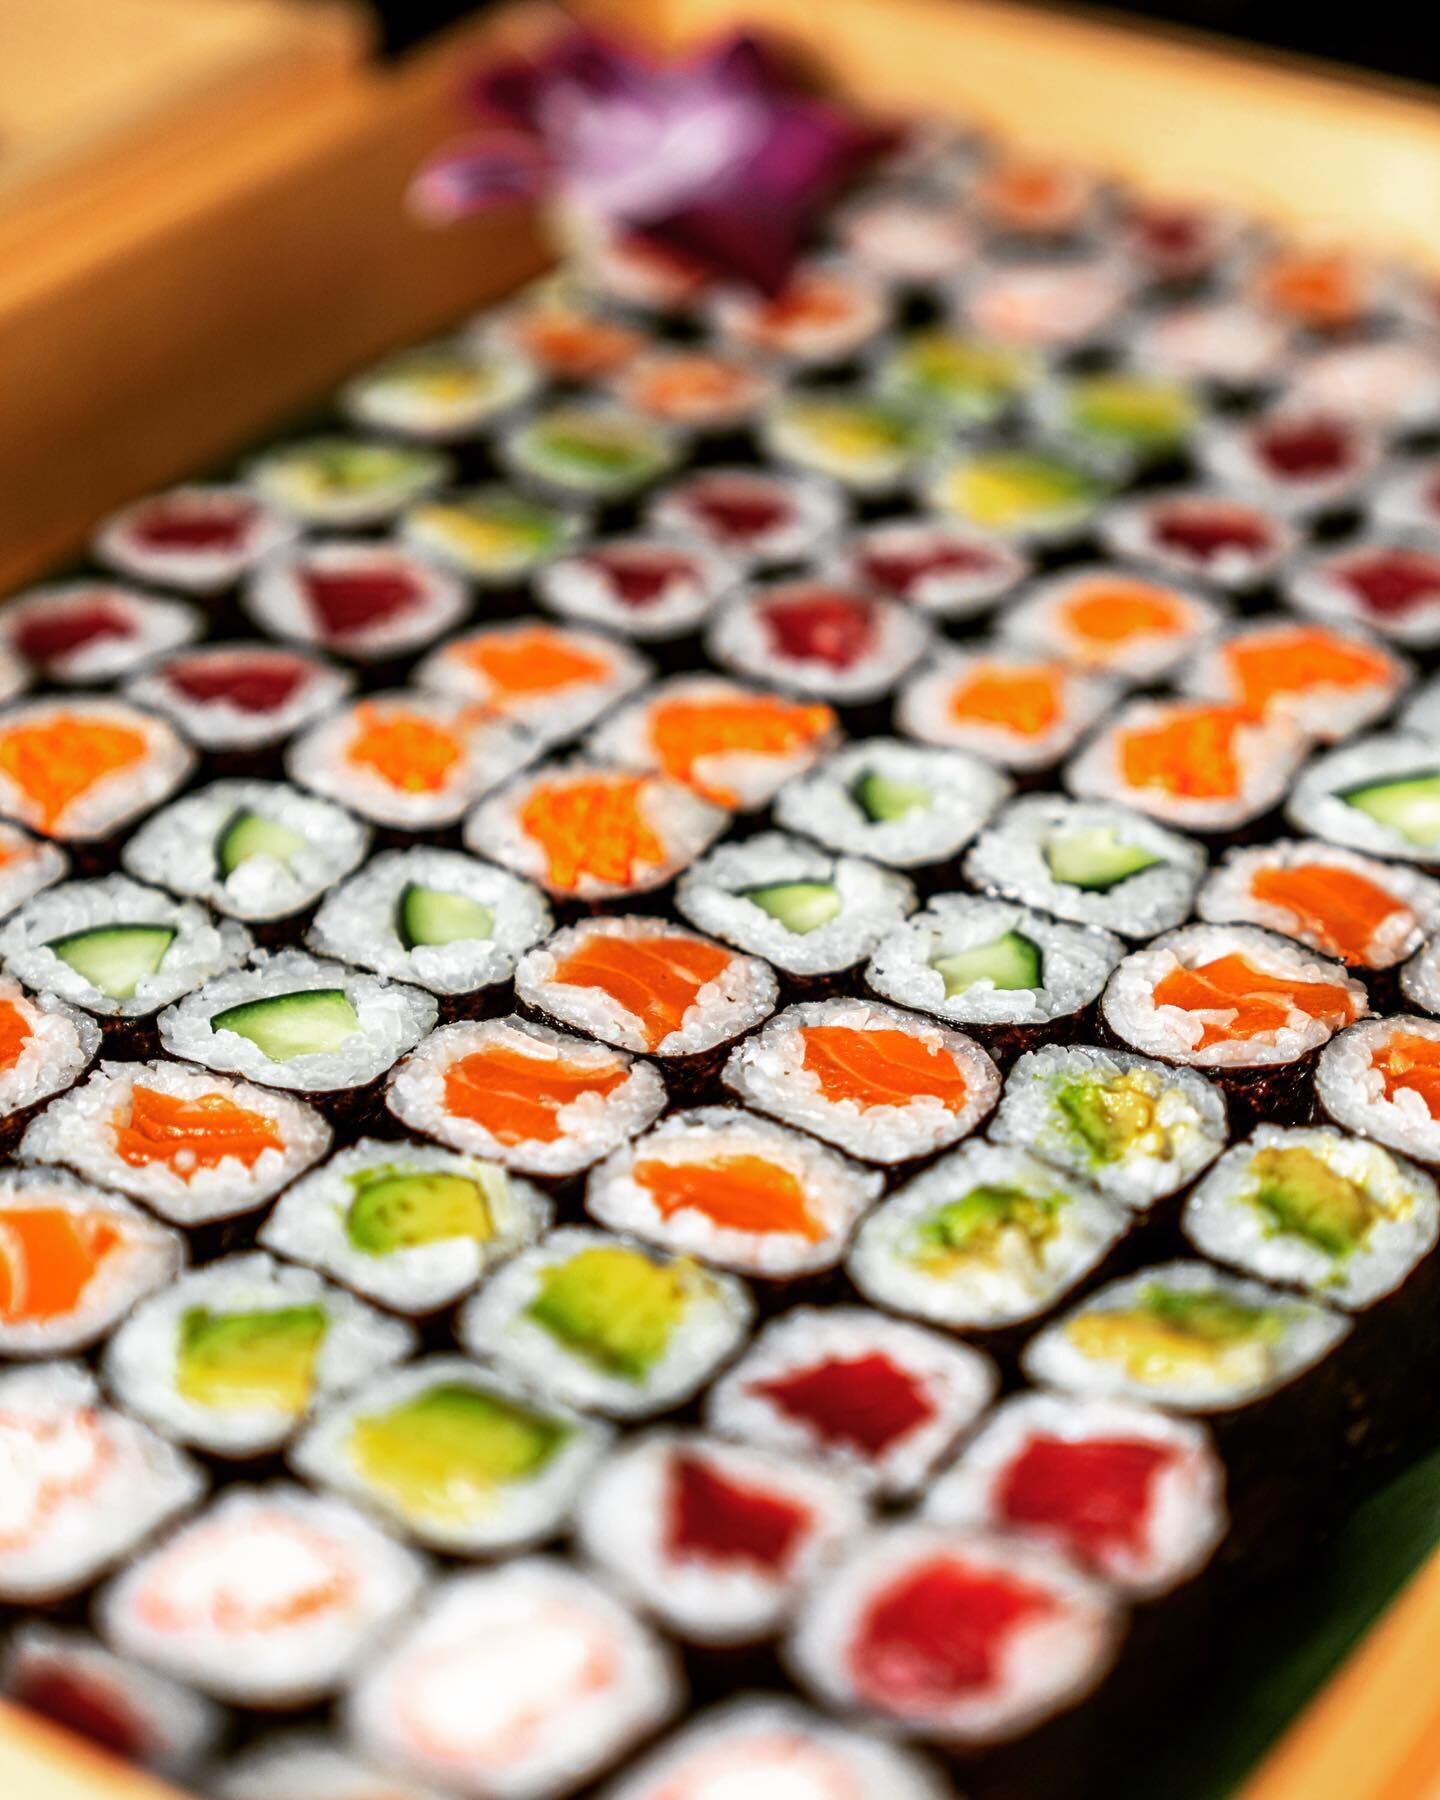 💙Happy Monday!!💜
Check out our beautifully arranged Maki sushi rolls also known as Hosomaki.😋 #maki #sushi #hosomaki #thin #rolls #salmon #tuna #cucumber #avocado #fillings #appetizers #sushilovers #sushichef #sushicatering